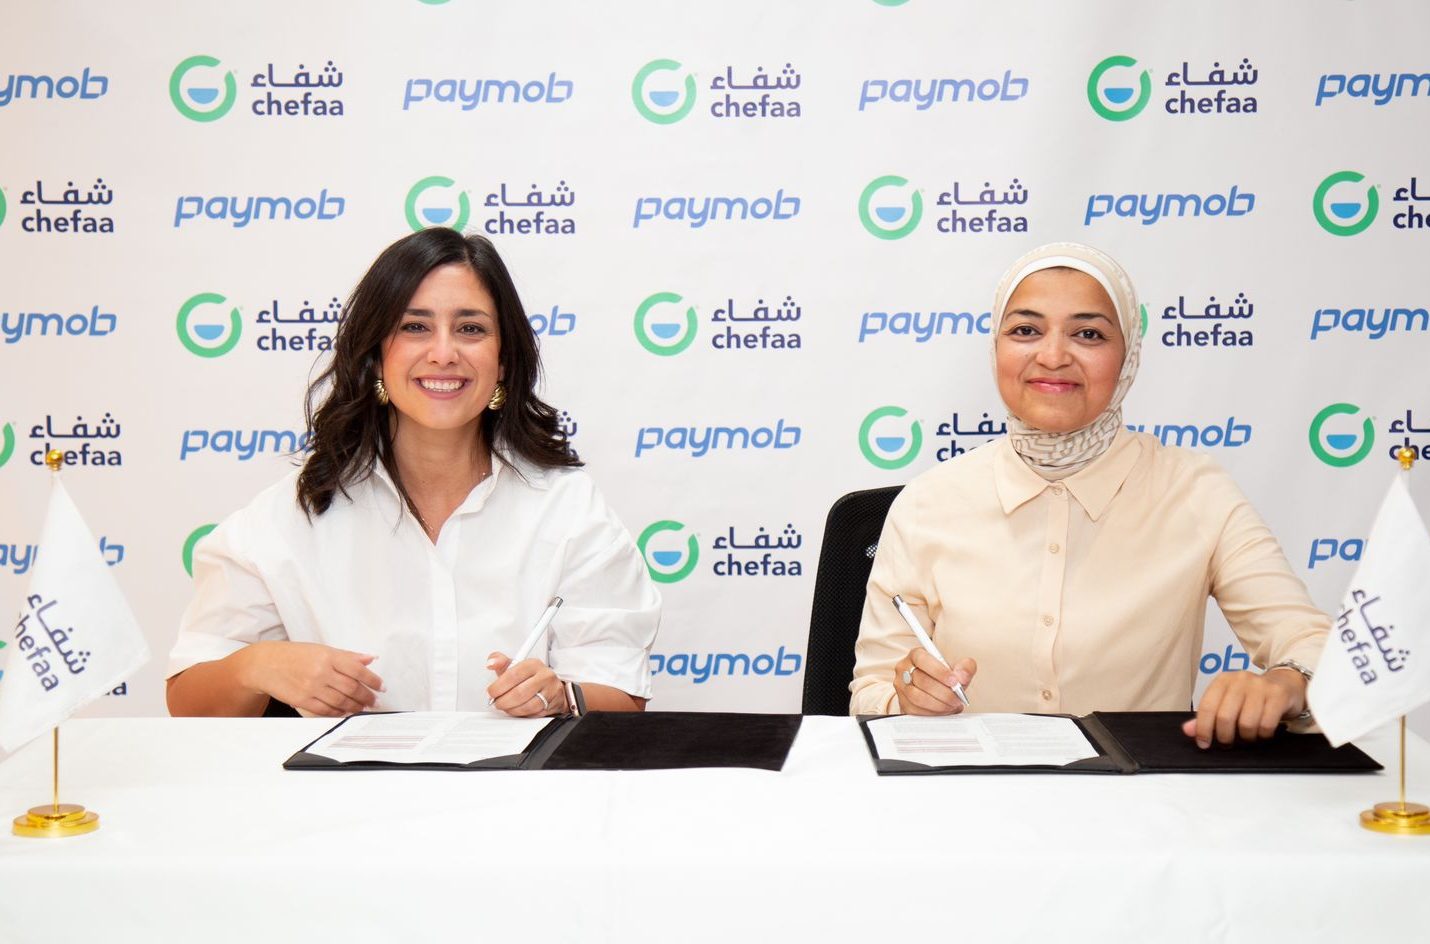 Paymob, Chefaa partner for digitizing pharmaceutical payments in Egypt